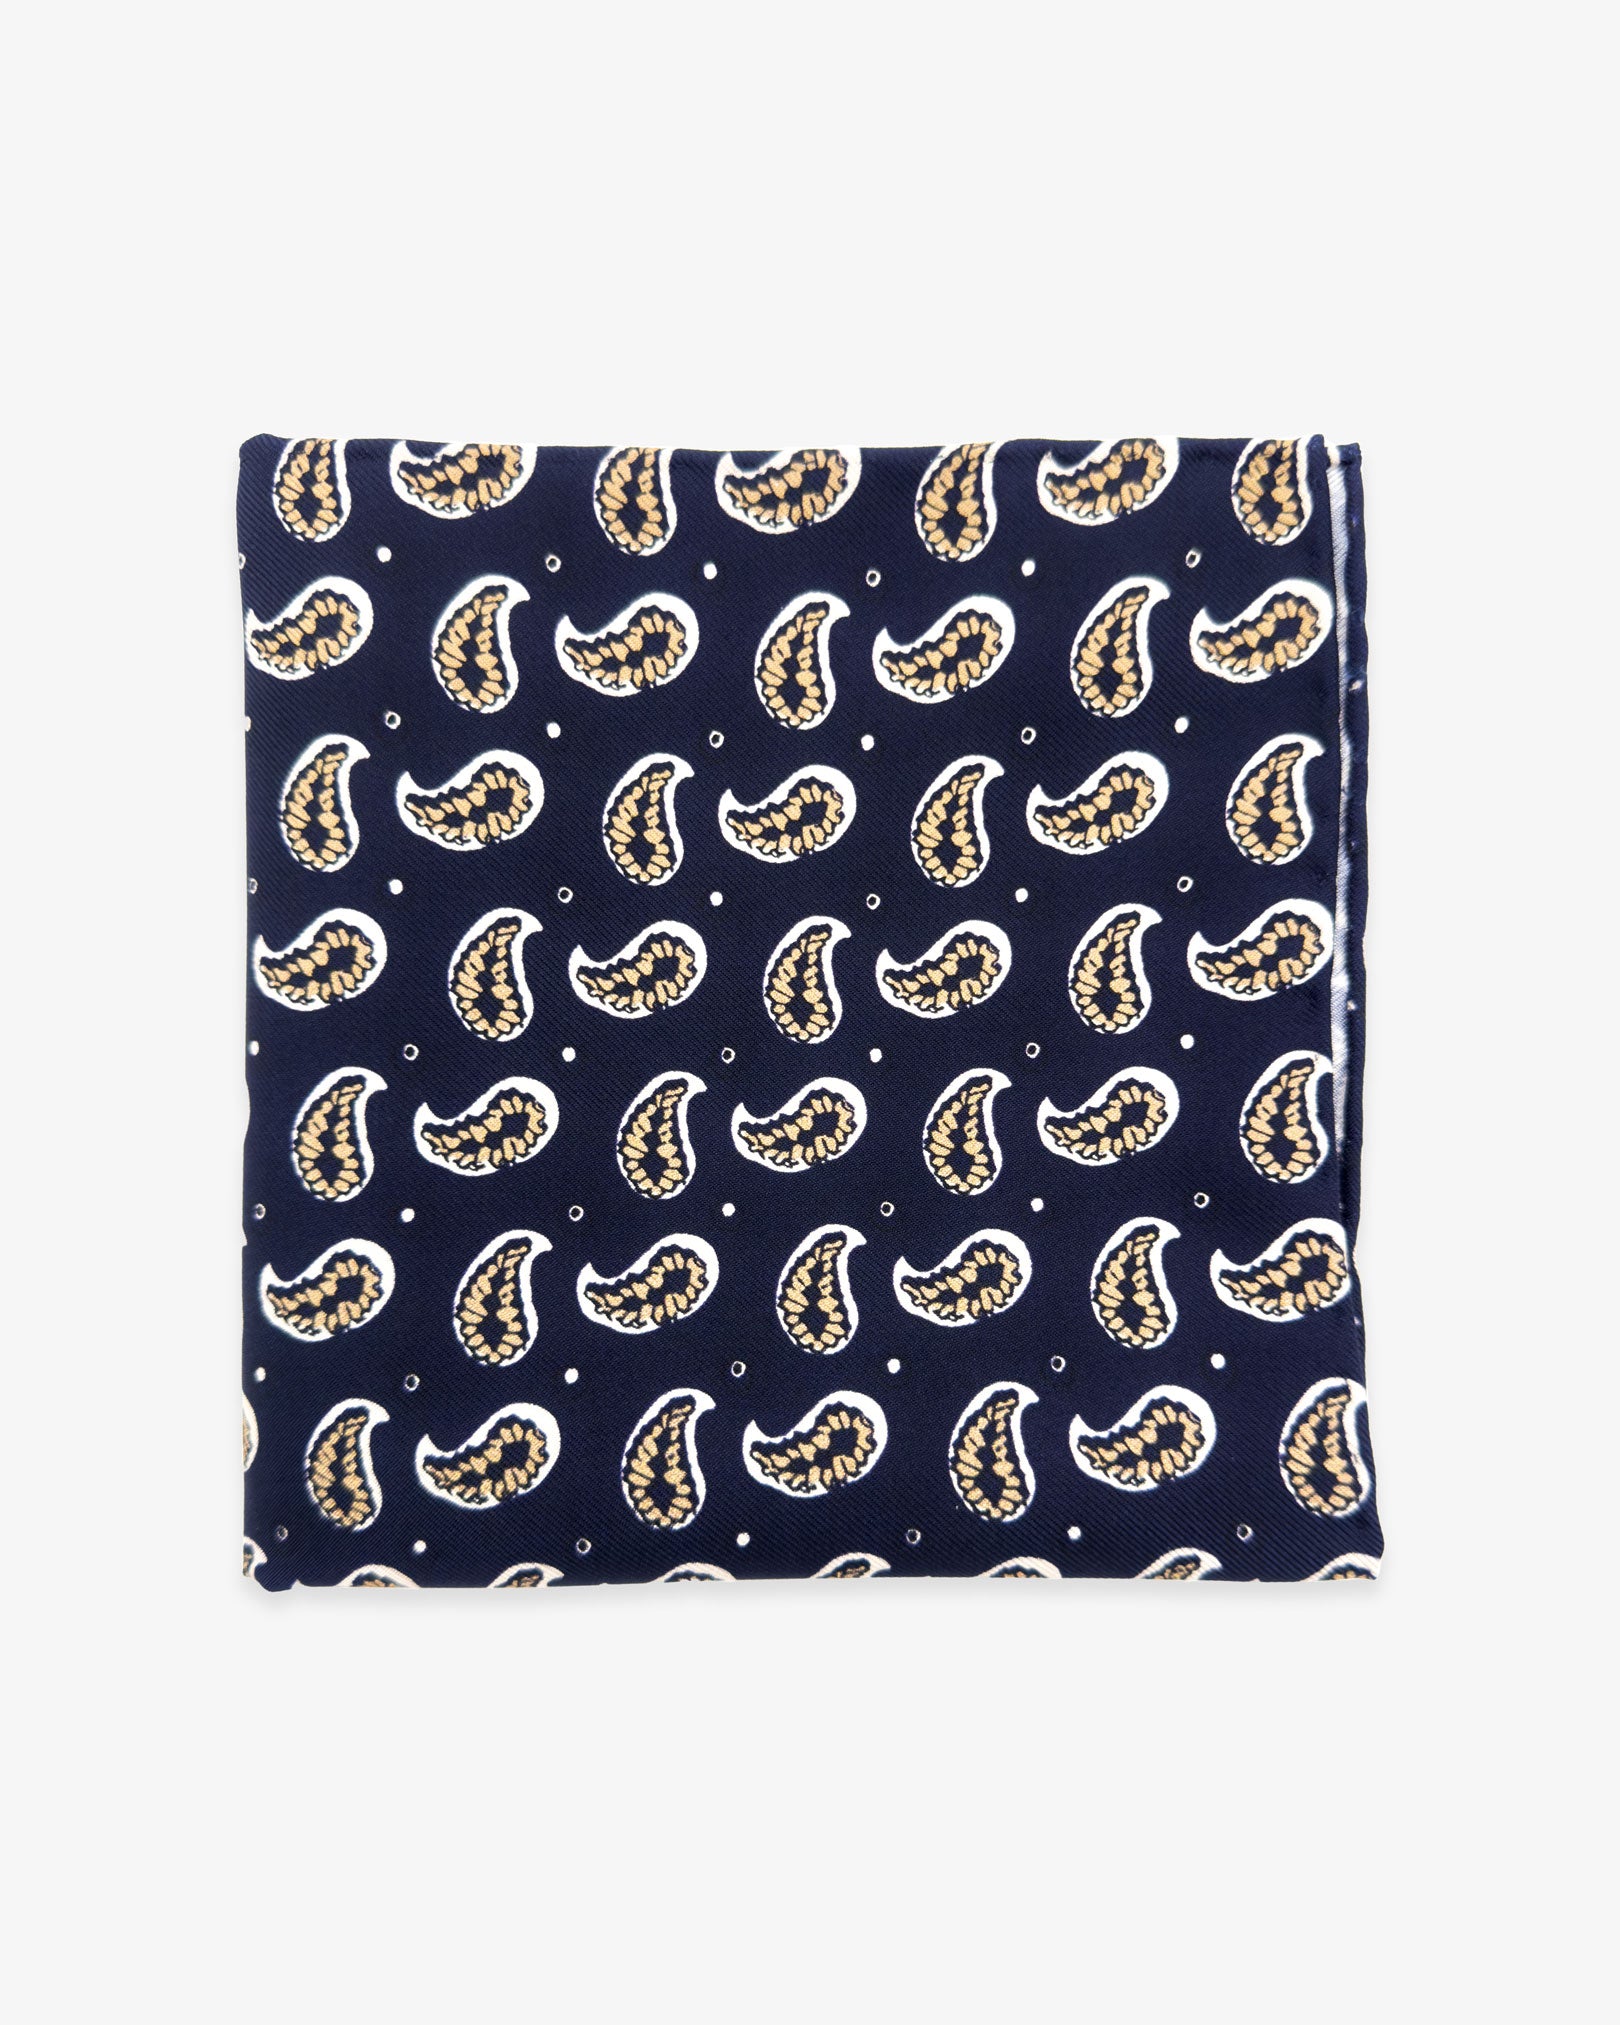 The 'Hadrian' silk pocket square from SOHO Scarves UK collection. Folded into a quarter, showing the stylised paisley patterns against a navy background.